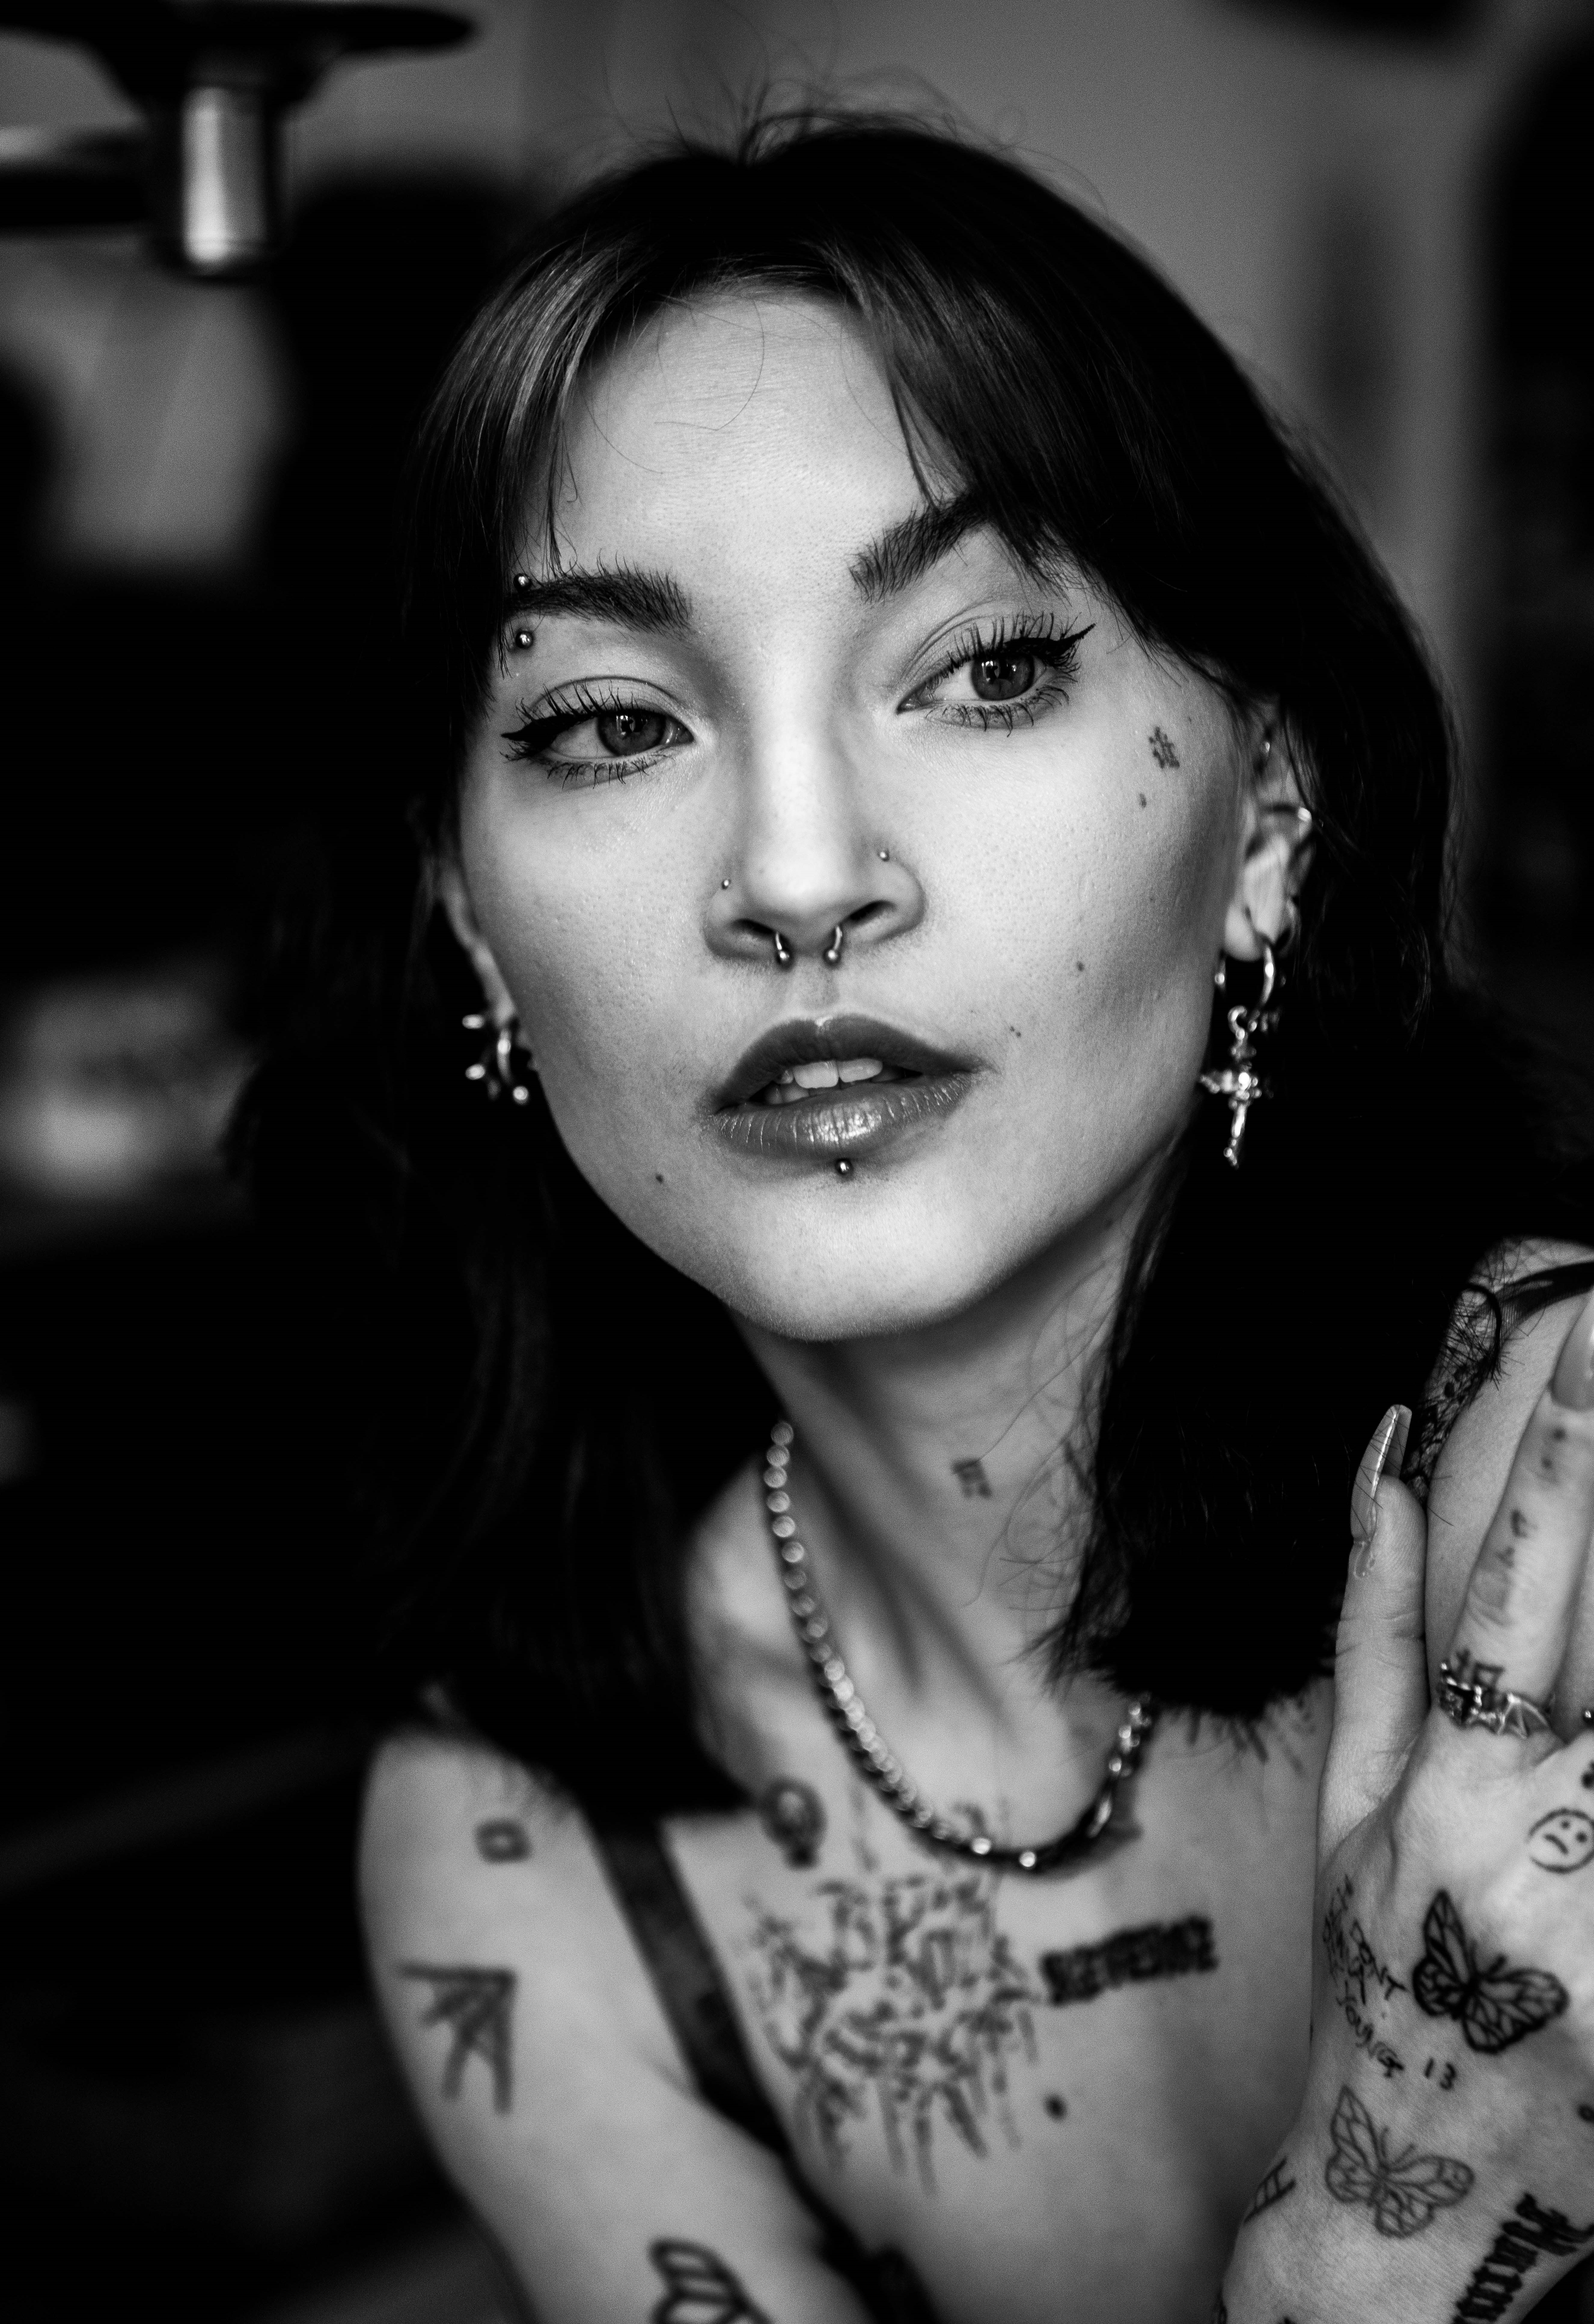 Rebby Yuer Foster, a Chinese-American person with brunette hair, tattoos and piercings. Blac and white photo.